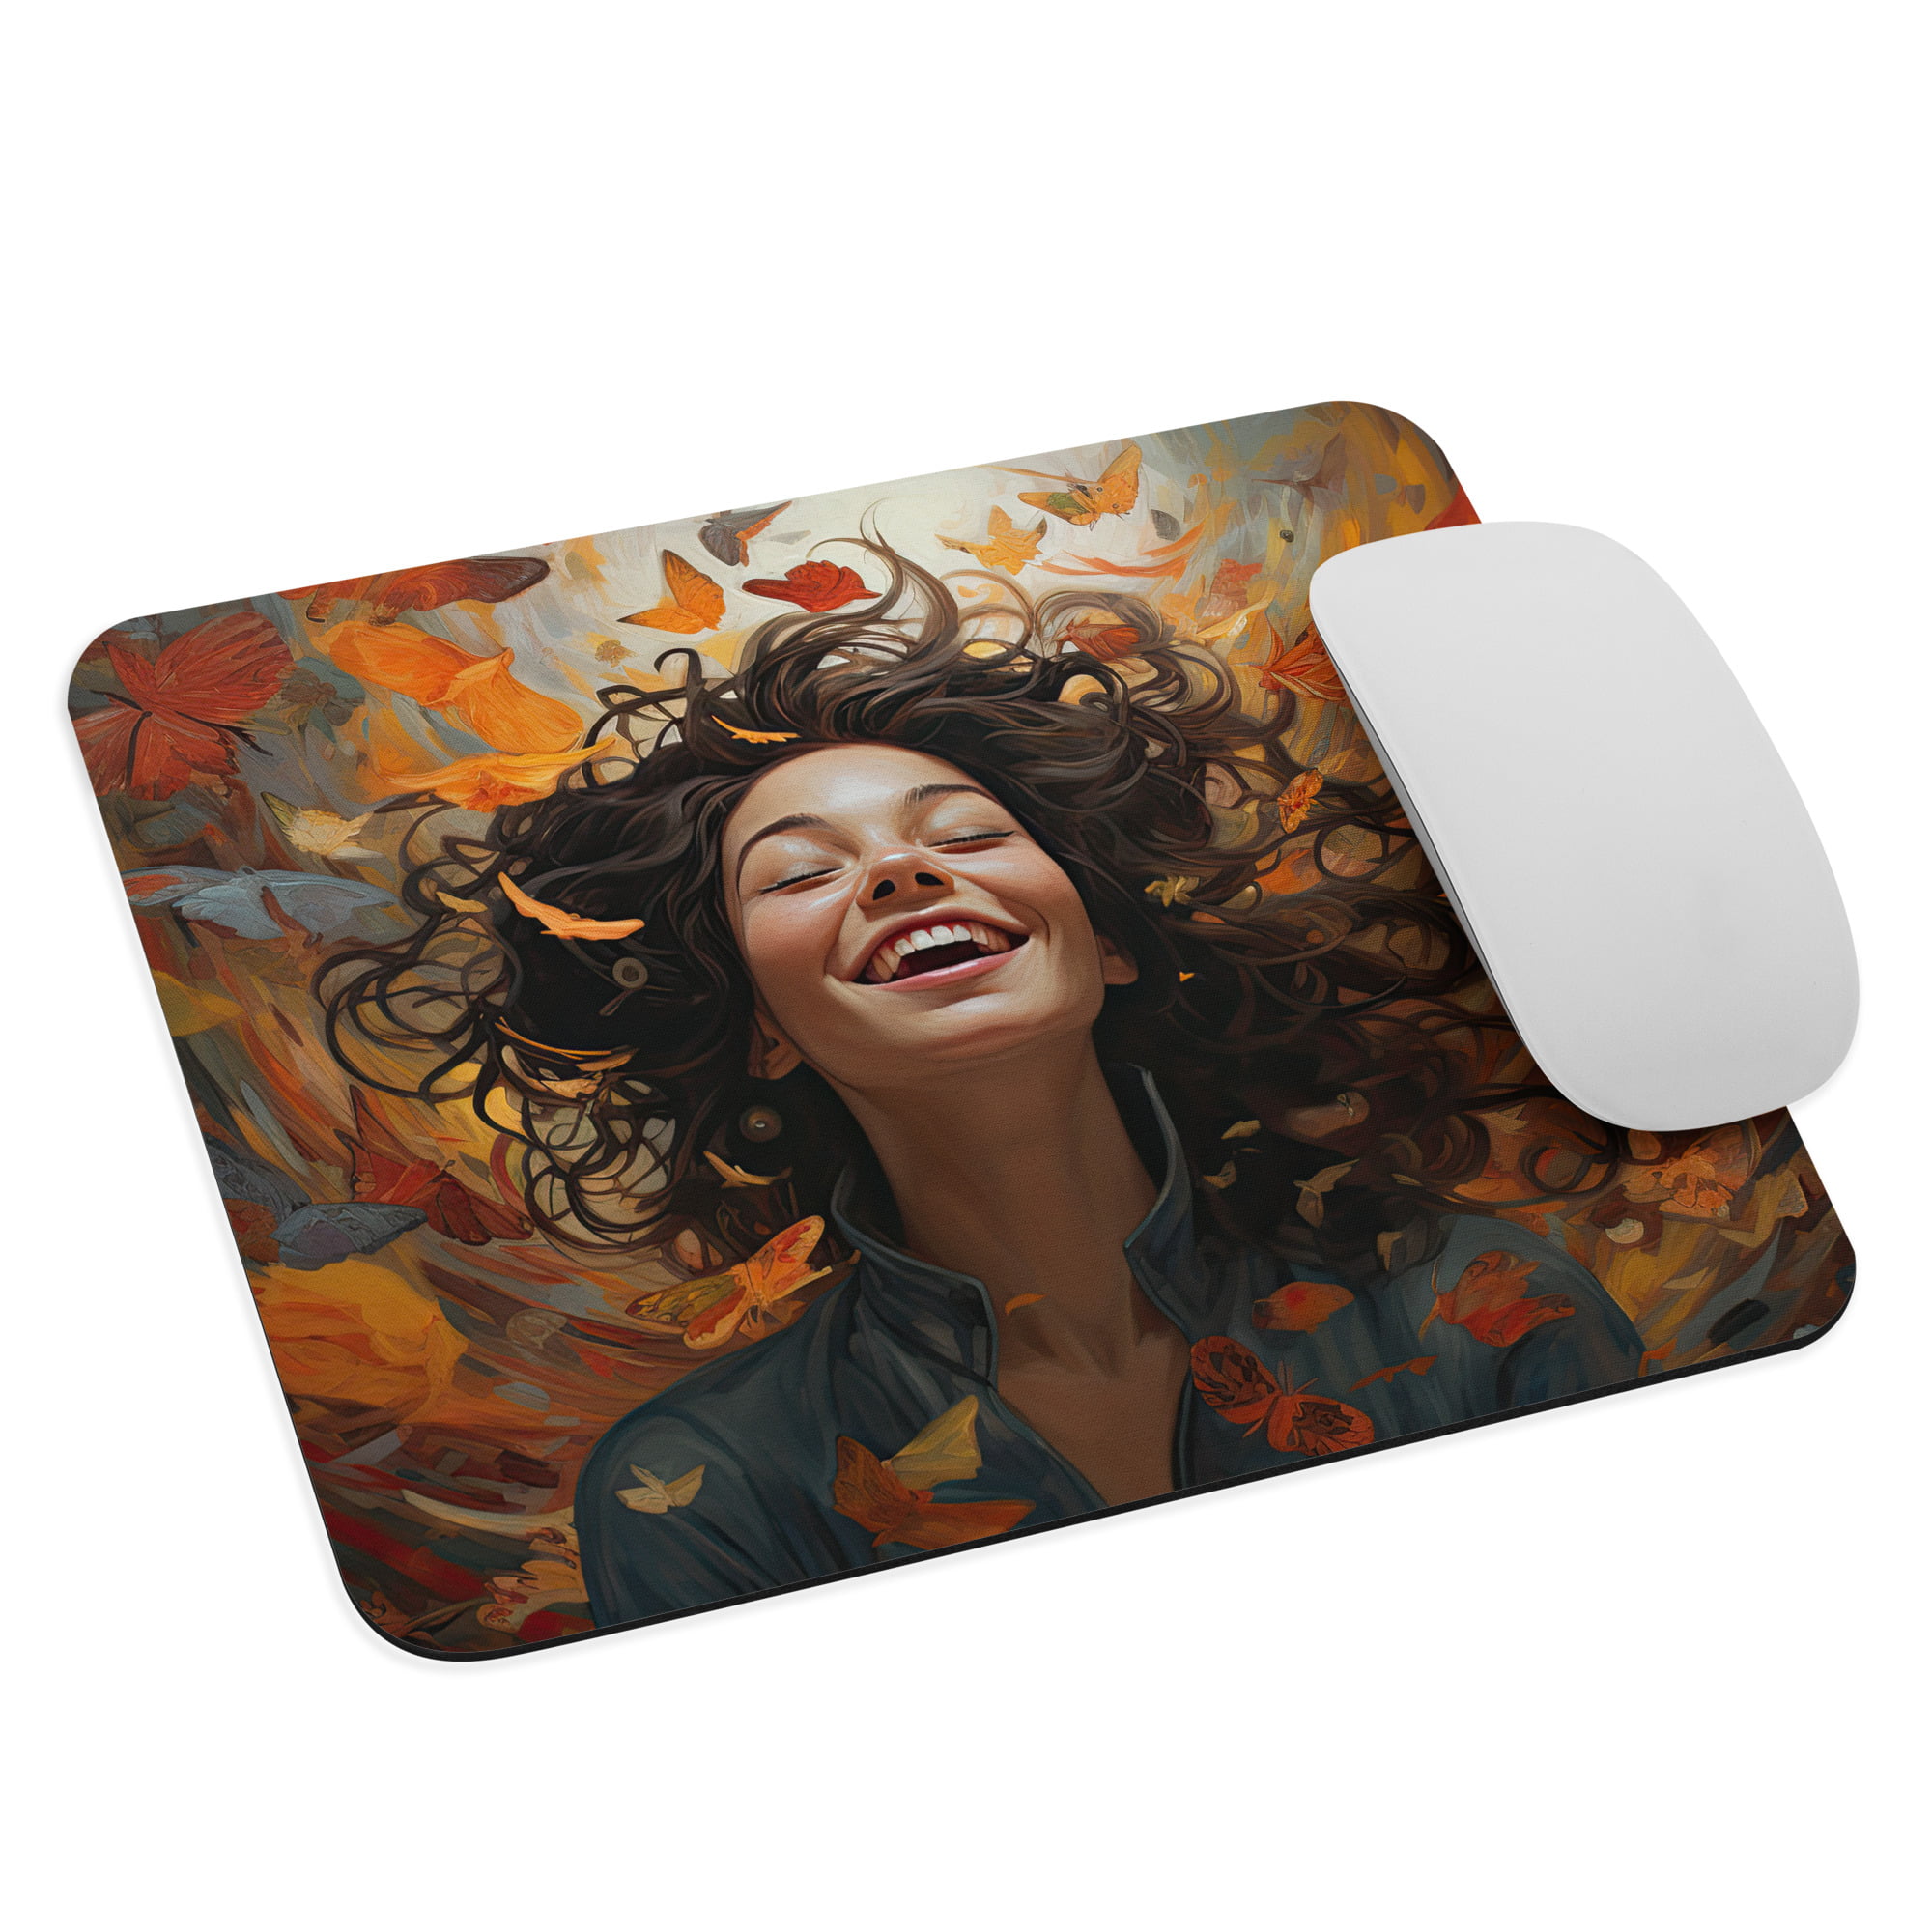 Pure Joy Happiness Mouse pad